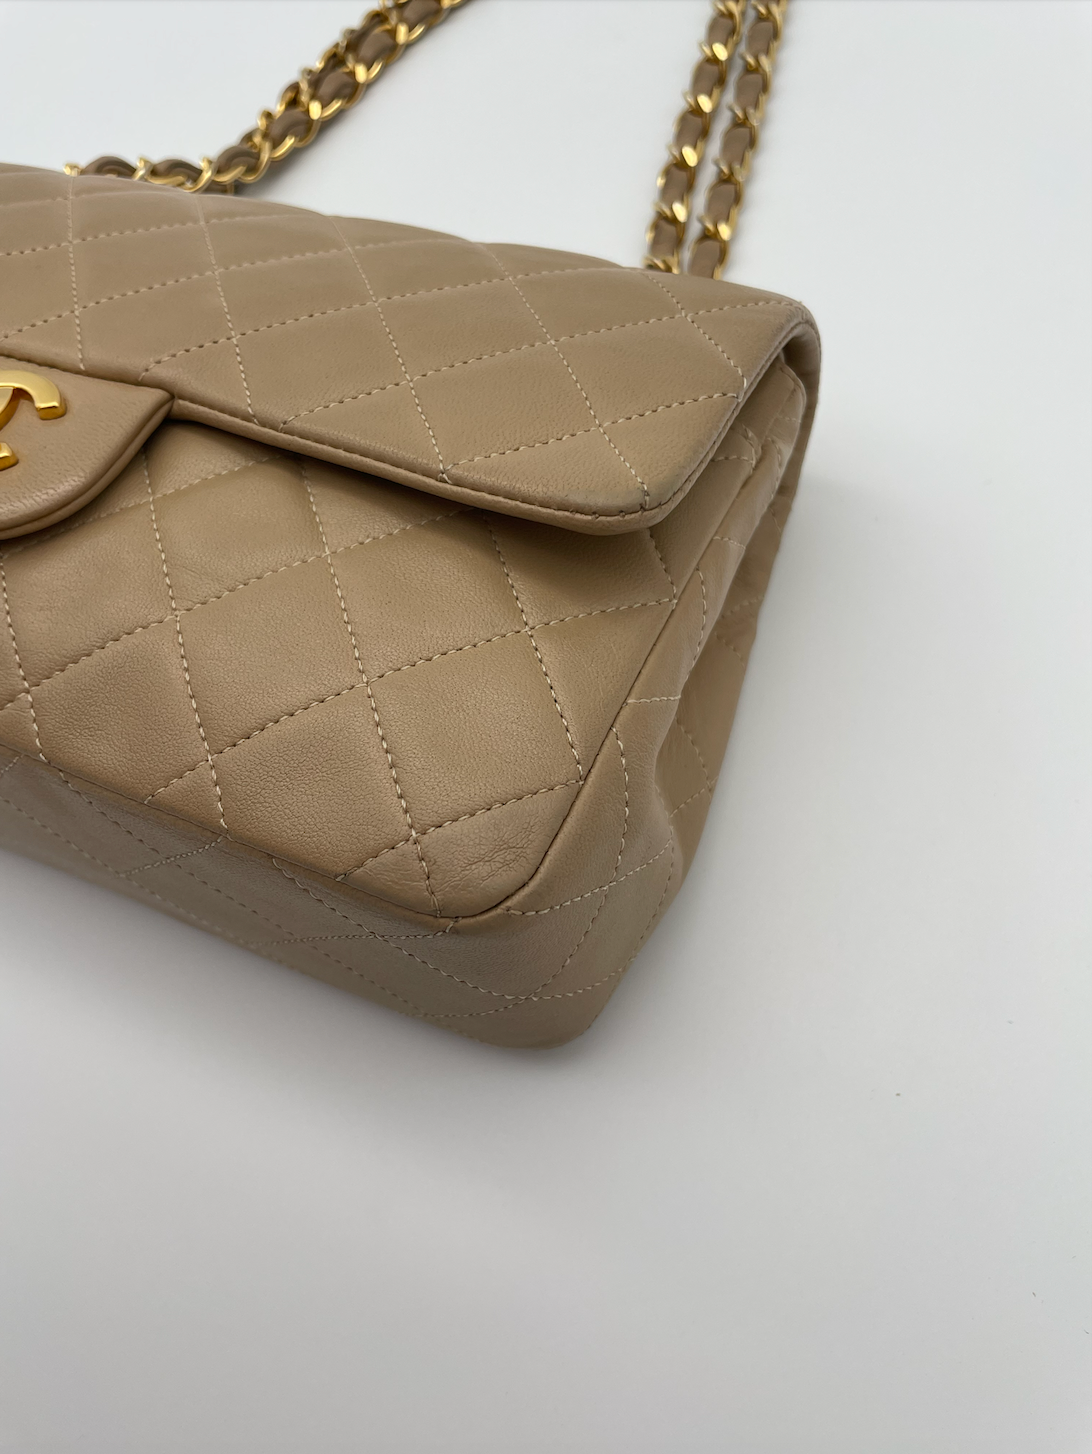 Pre-Loved Chanel Beige Small Classic Flap – The Bag Lady